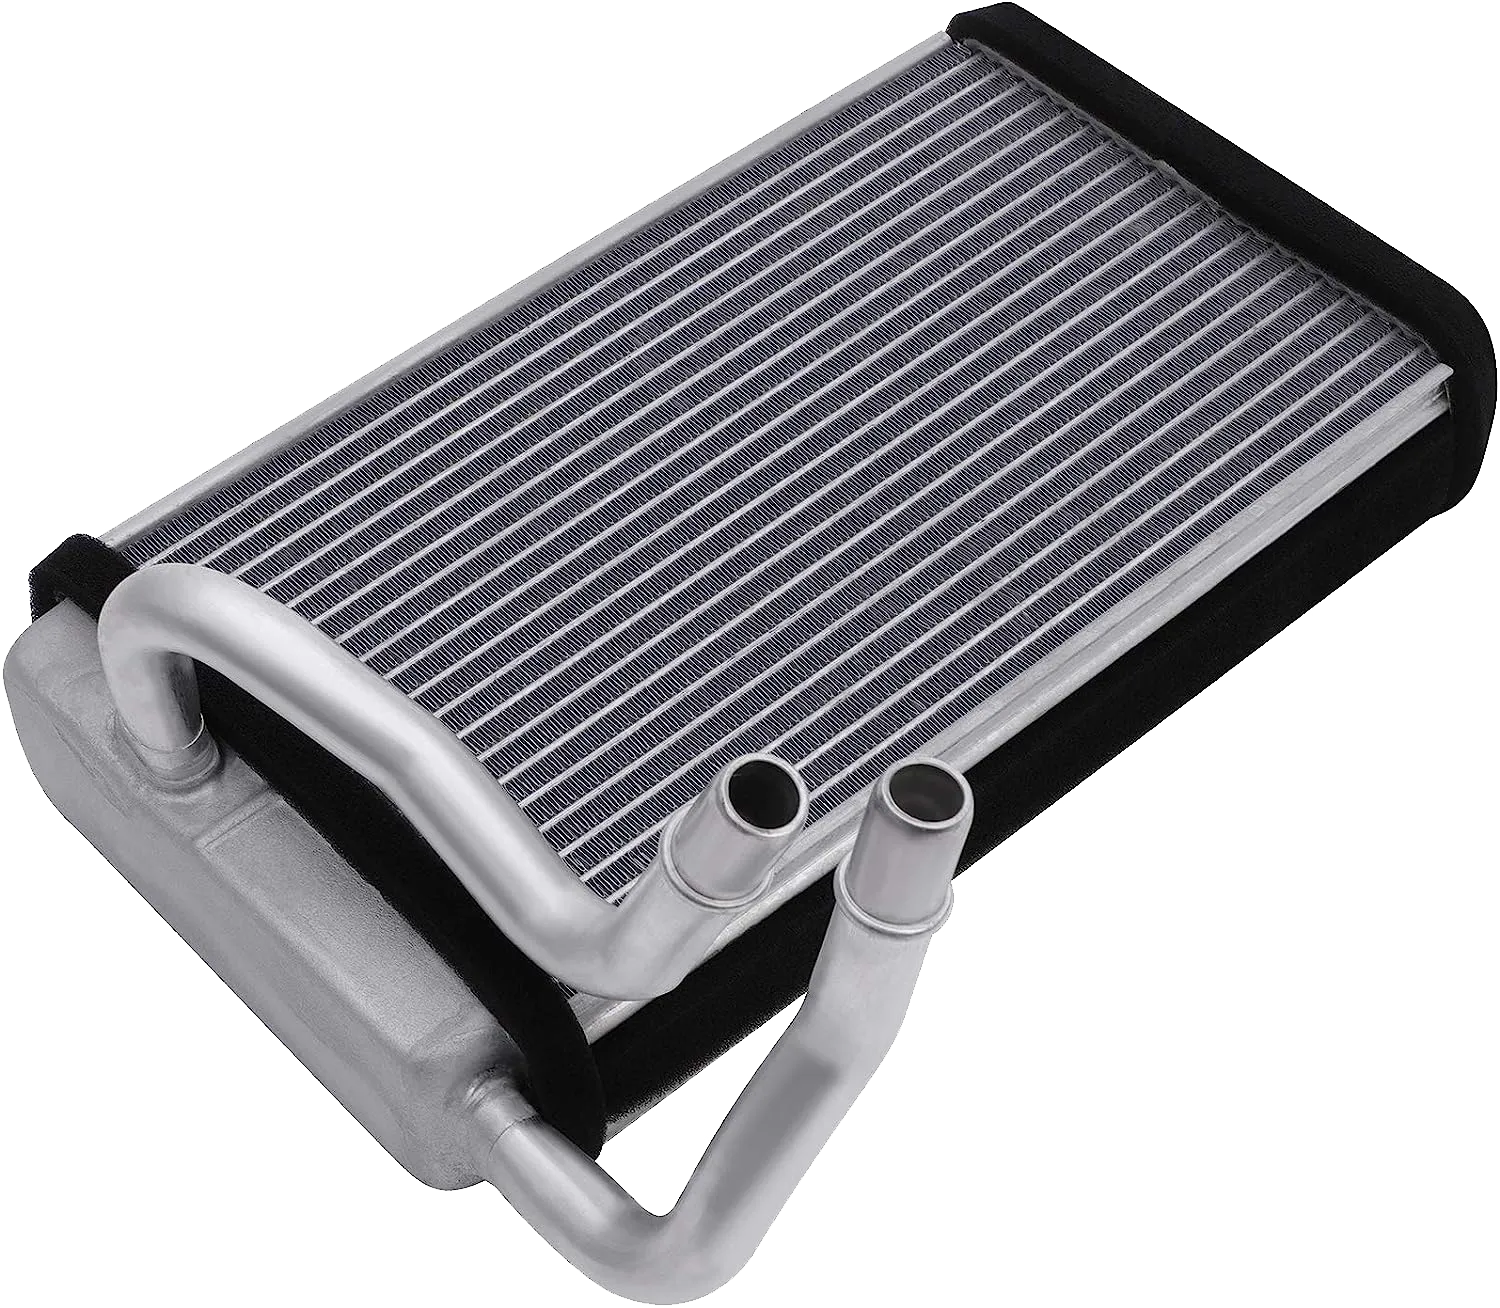 The Heater core is a complete set of devices that blow cold air to the surface of the heat exchanger, absorb its heat and guide it into the car, thereby increasing the temperature inside the car. AKJ supports sample development, customization and on-site inspection of the factory.